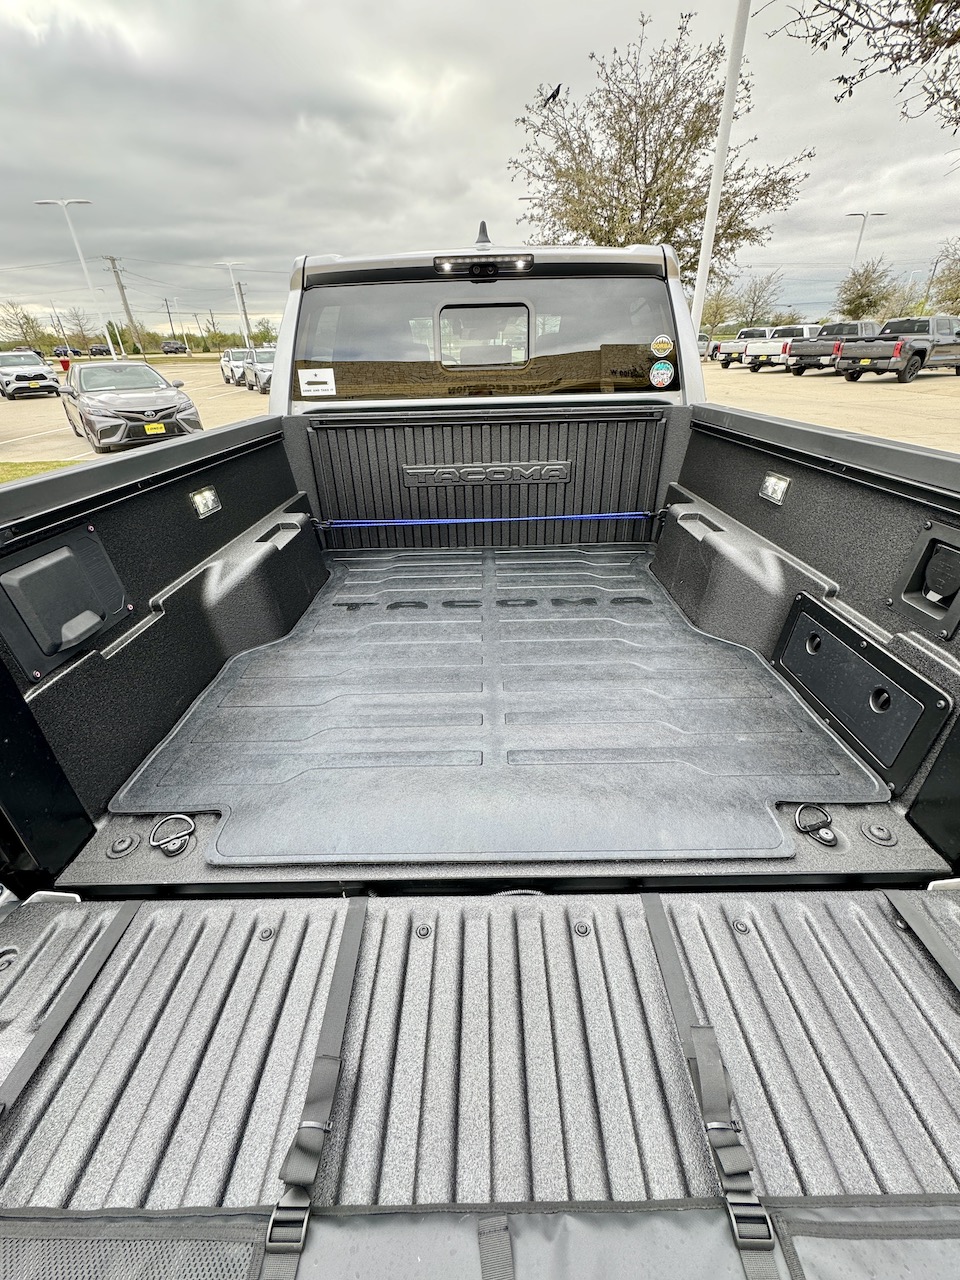 2024 Tacoma Tacoma Composite Bed is slippery. Bed mat / bed liner / spray in bed liner? 2024 Taco Bed mat